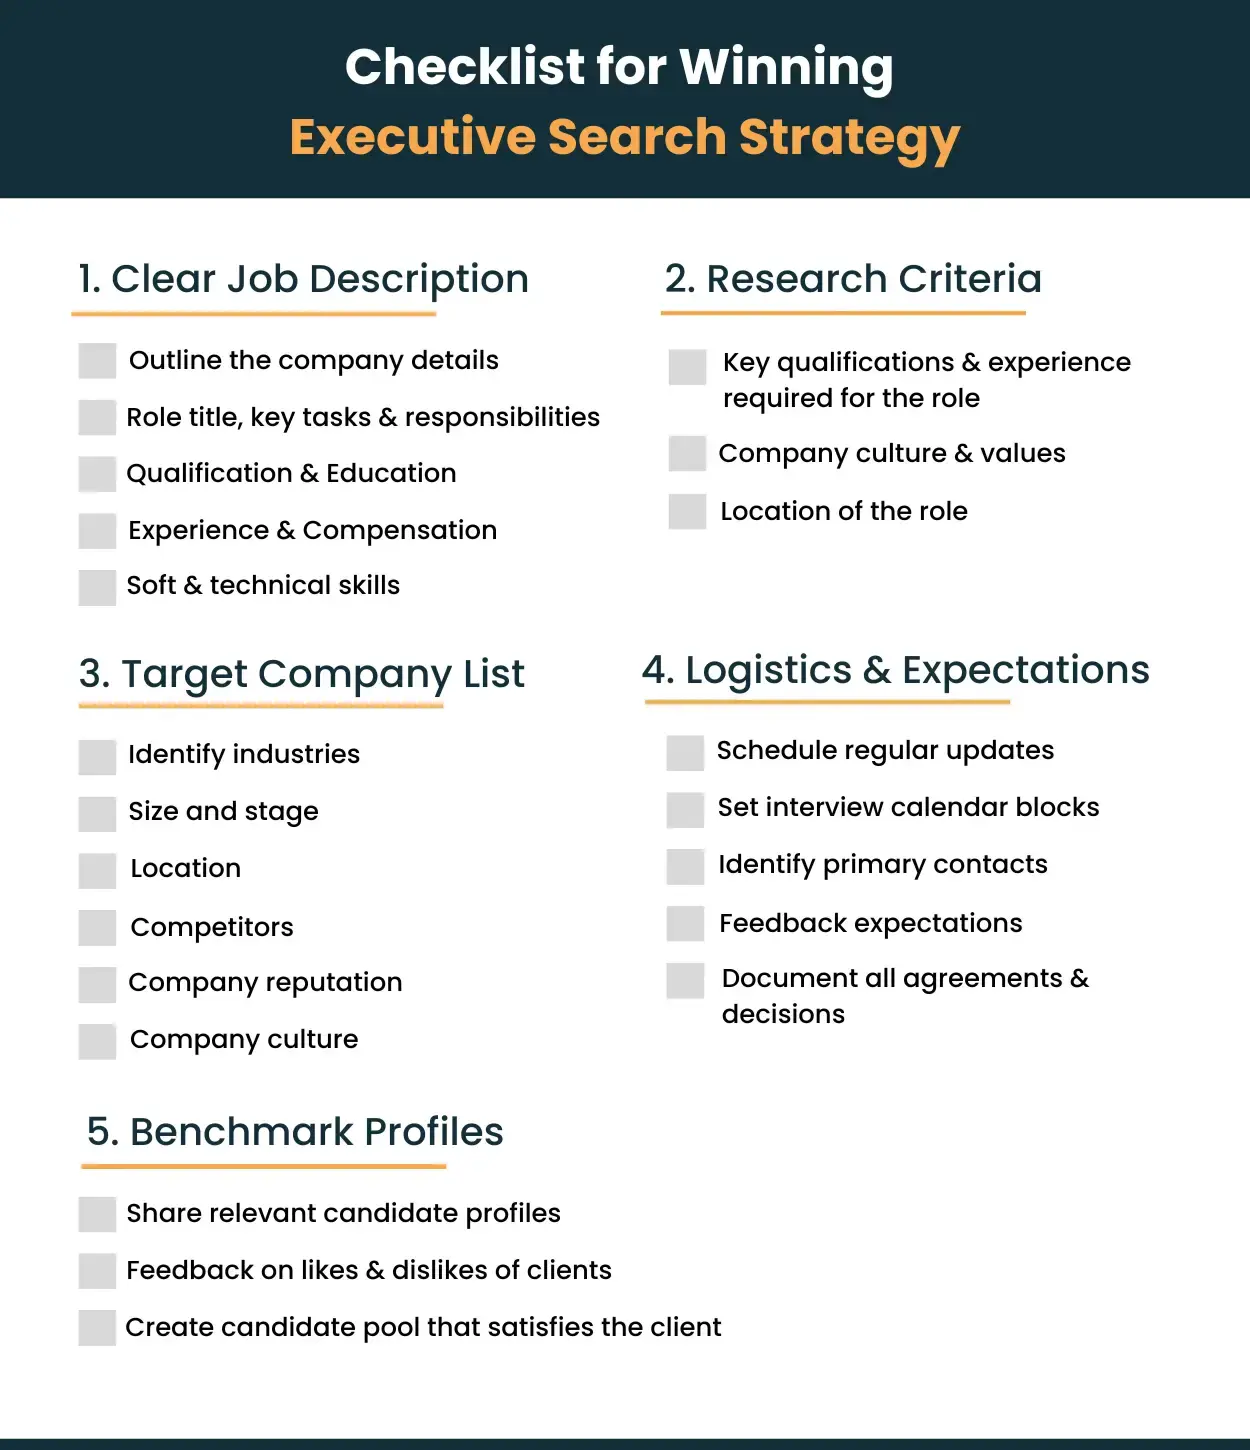 Checklist for executive search strategy